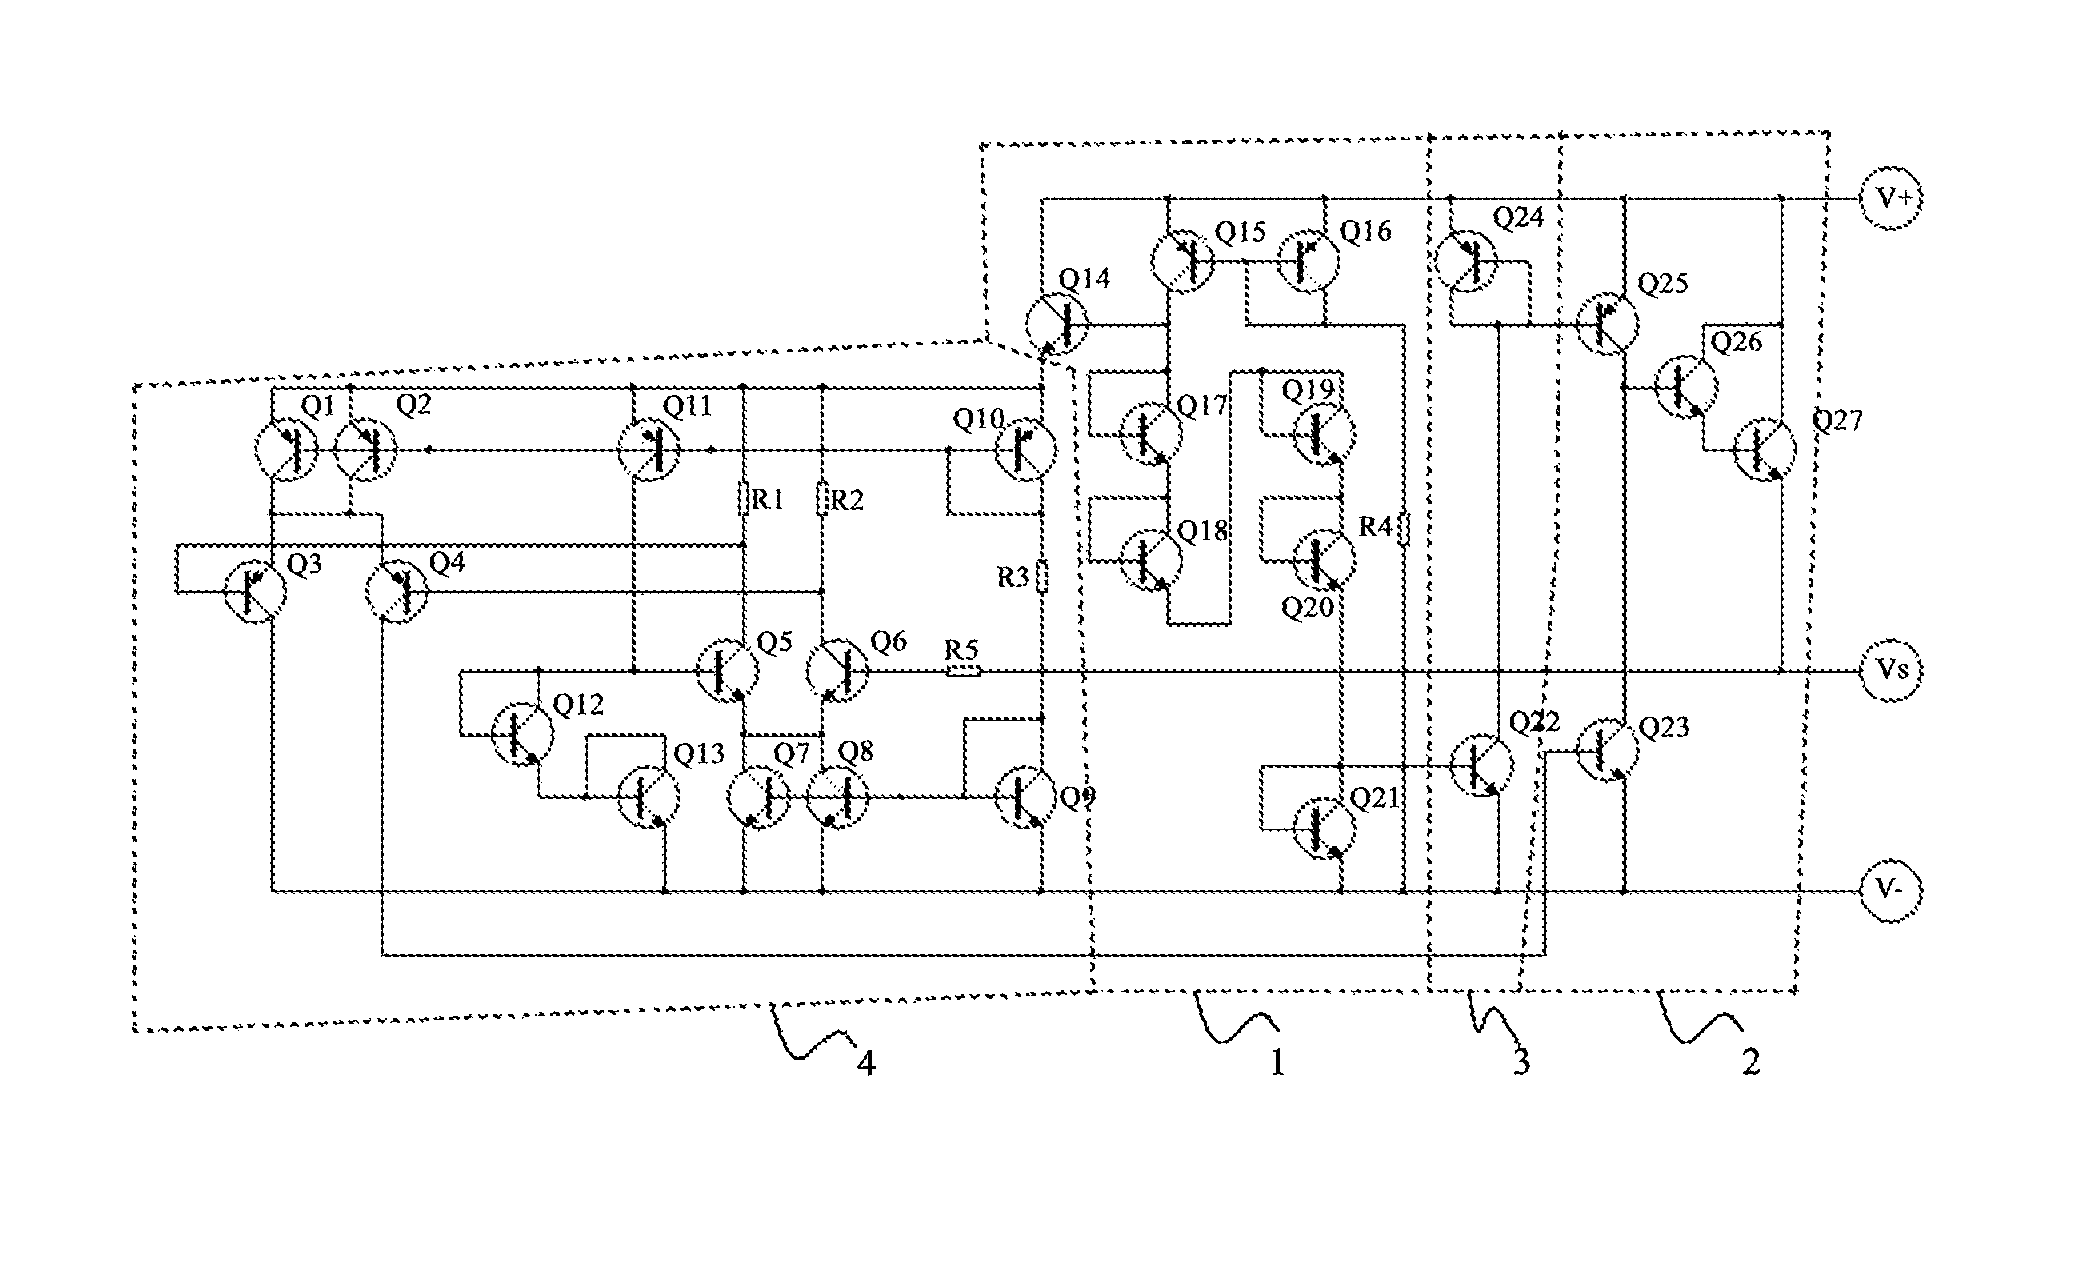 Method of taking power with low-voltage bypass by integrated circuit for AC direct driving LEDs and the integrated circuit